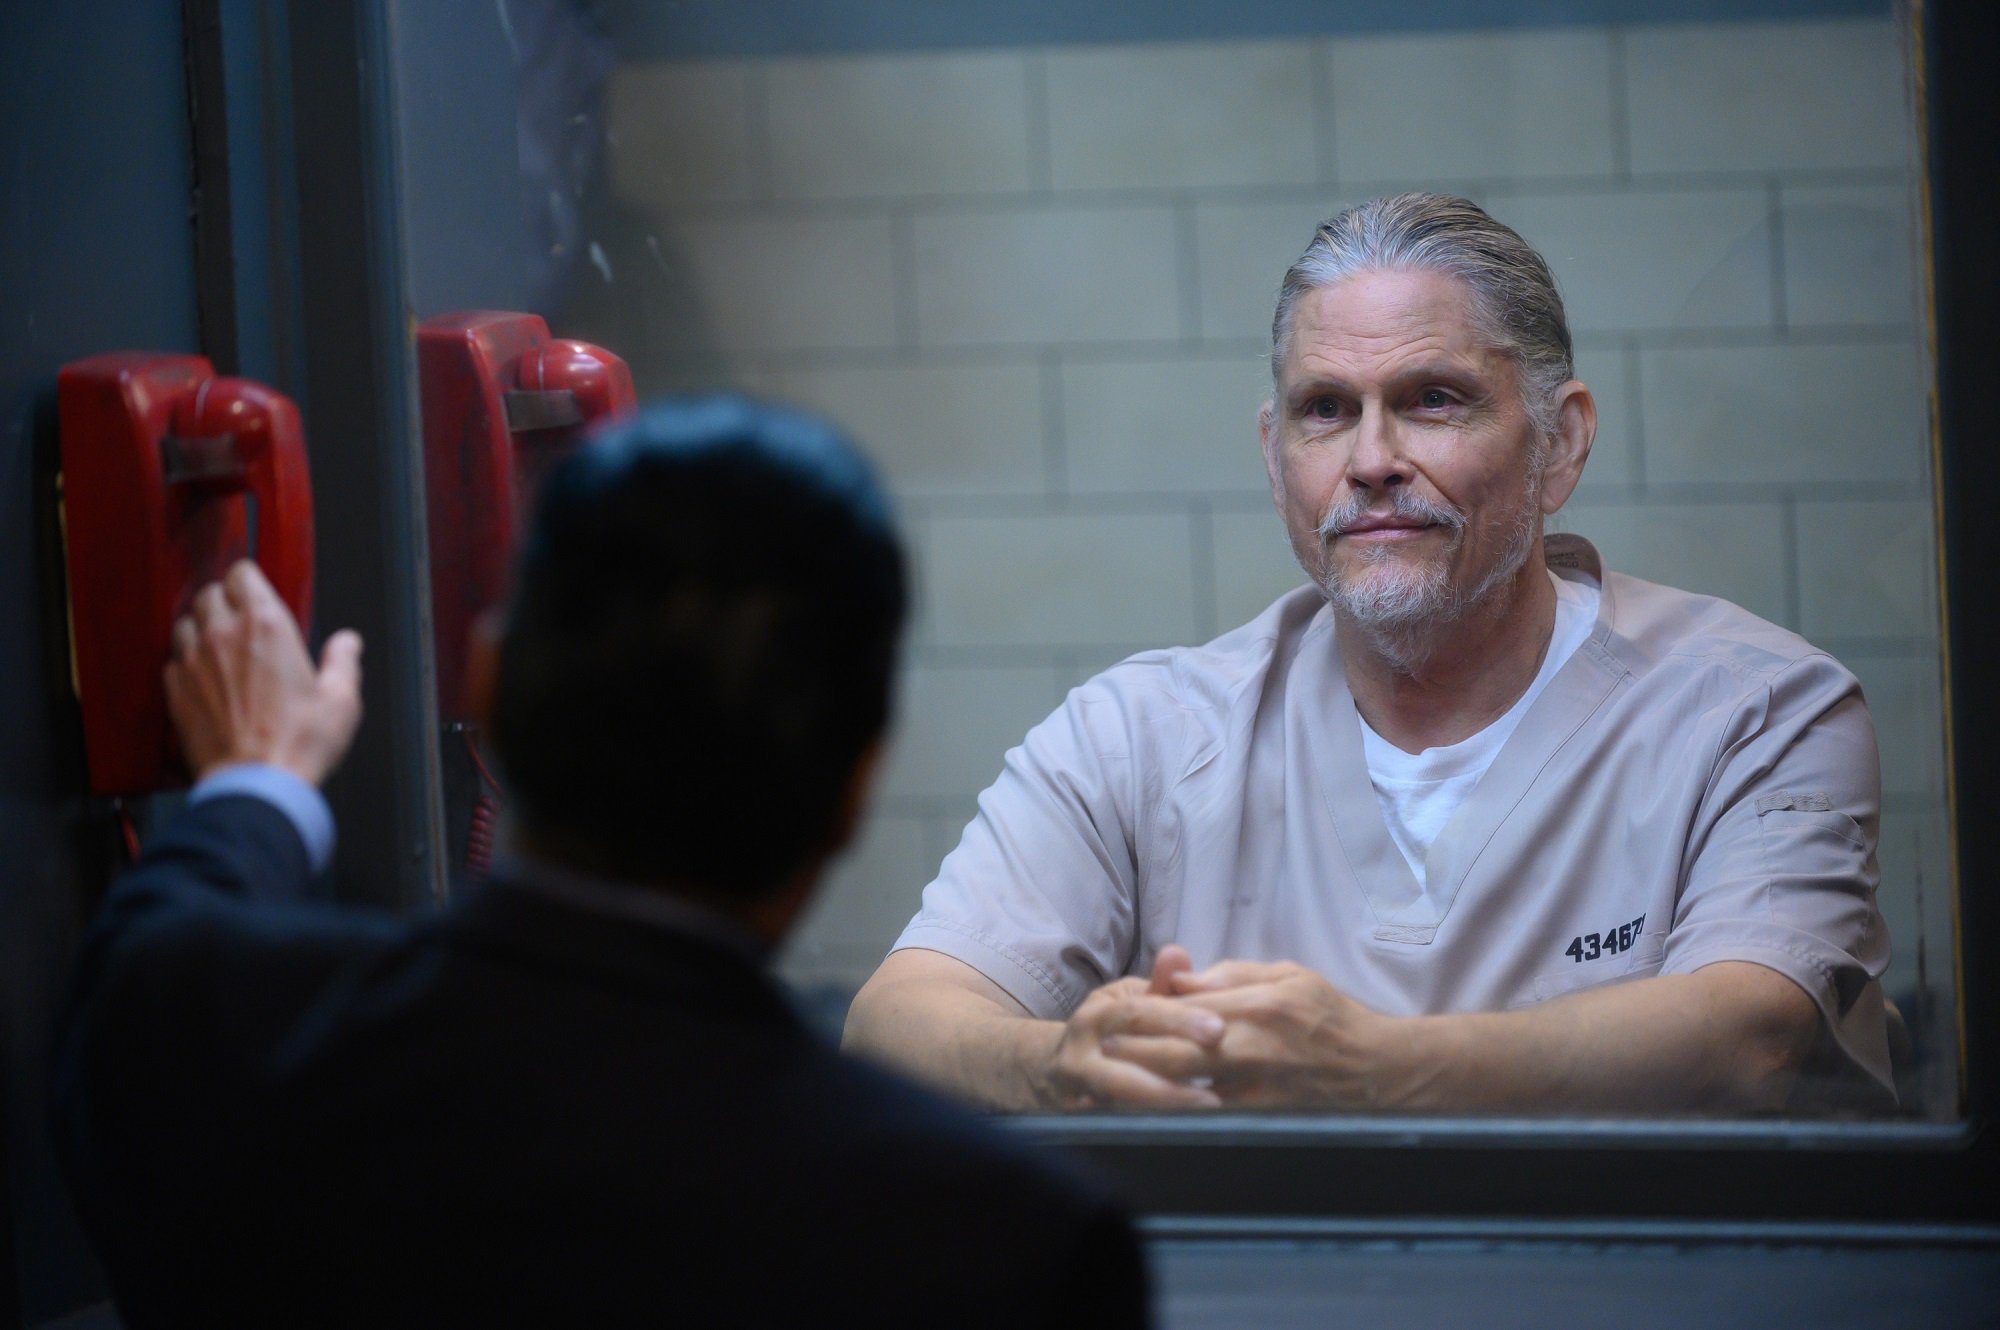 General Hospital will feature the return of Cyrus Renault, pictured here in a grey prison jumpsuit while looking through a plexiglass